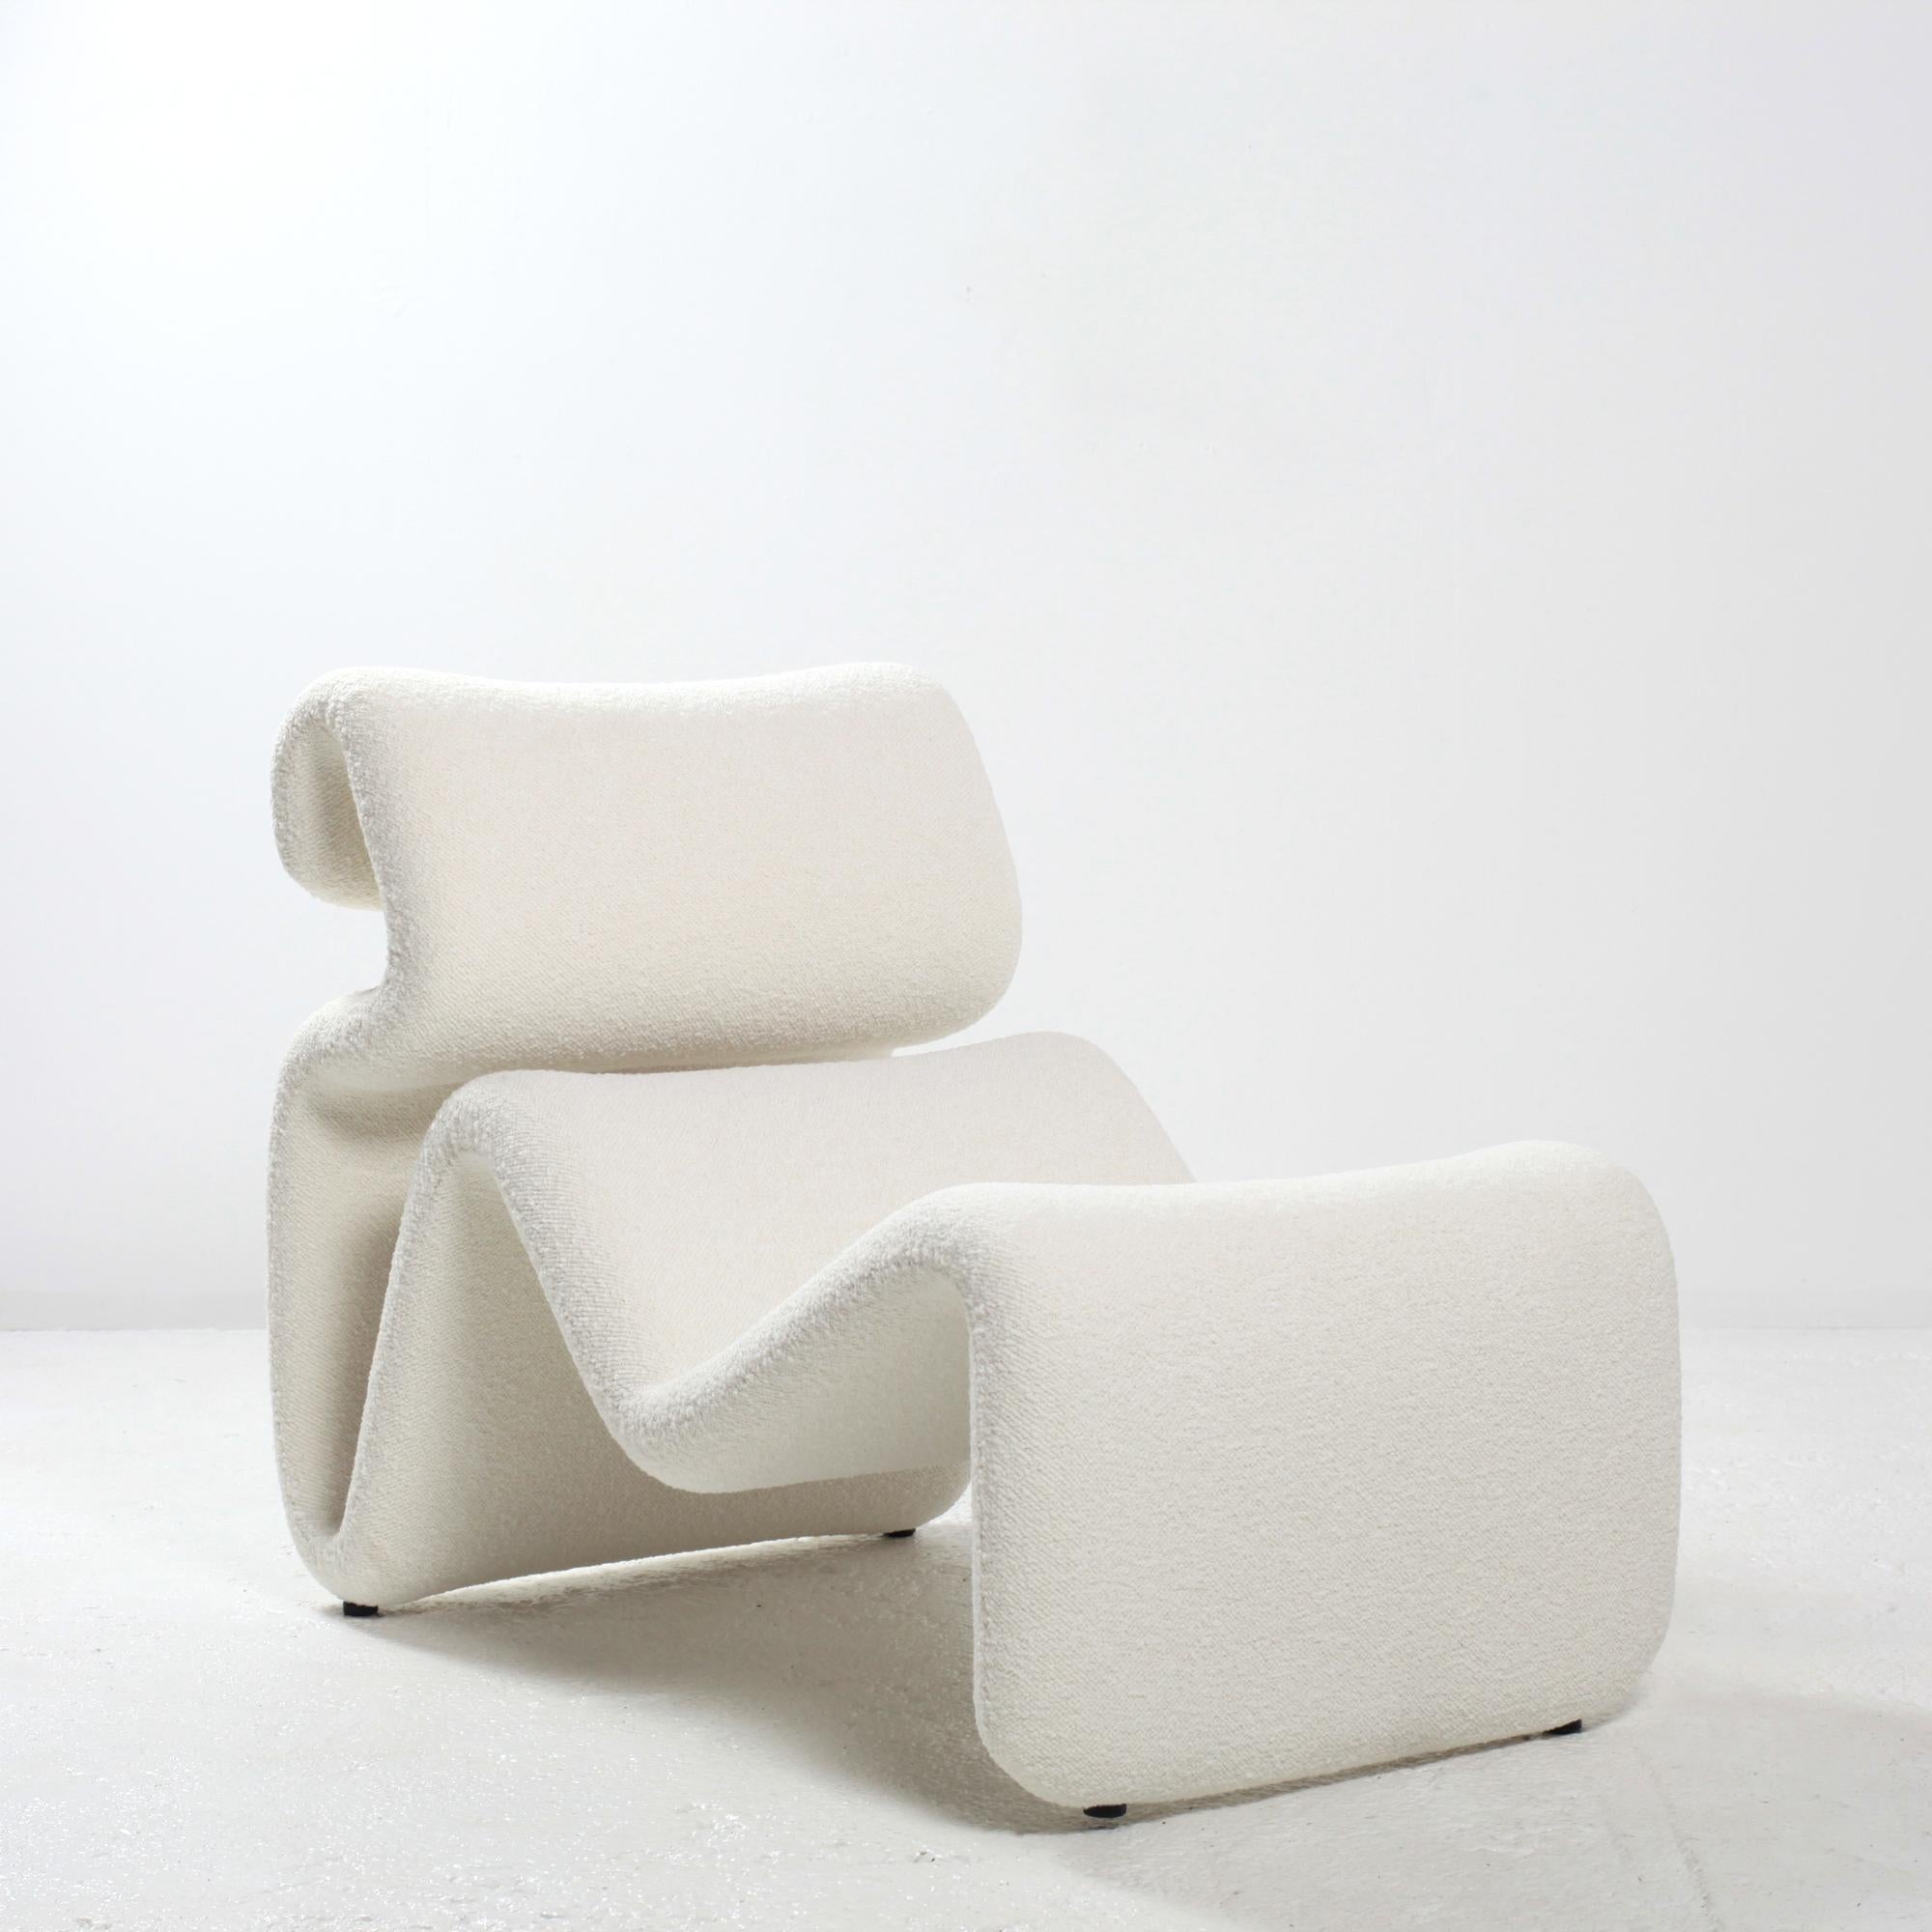 Swedish Etcetera Lounge Chair With Footstool by Jan Ekselius for JOC Sweden 1970s